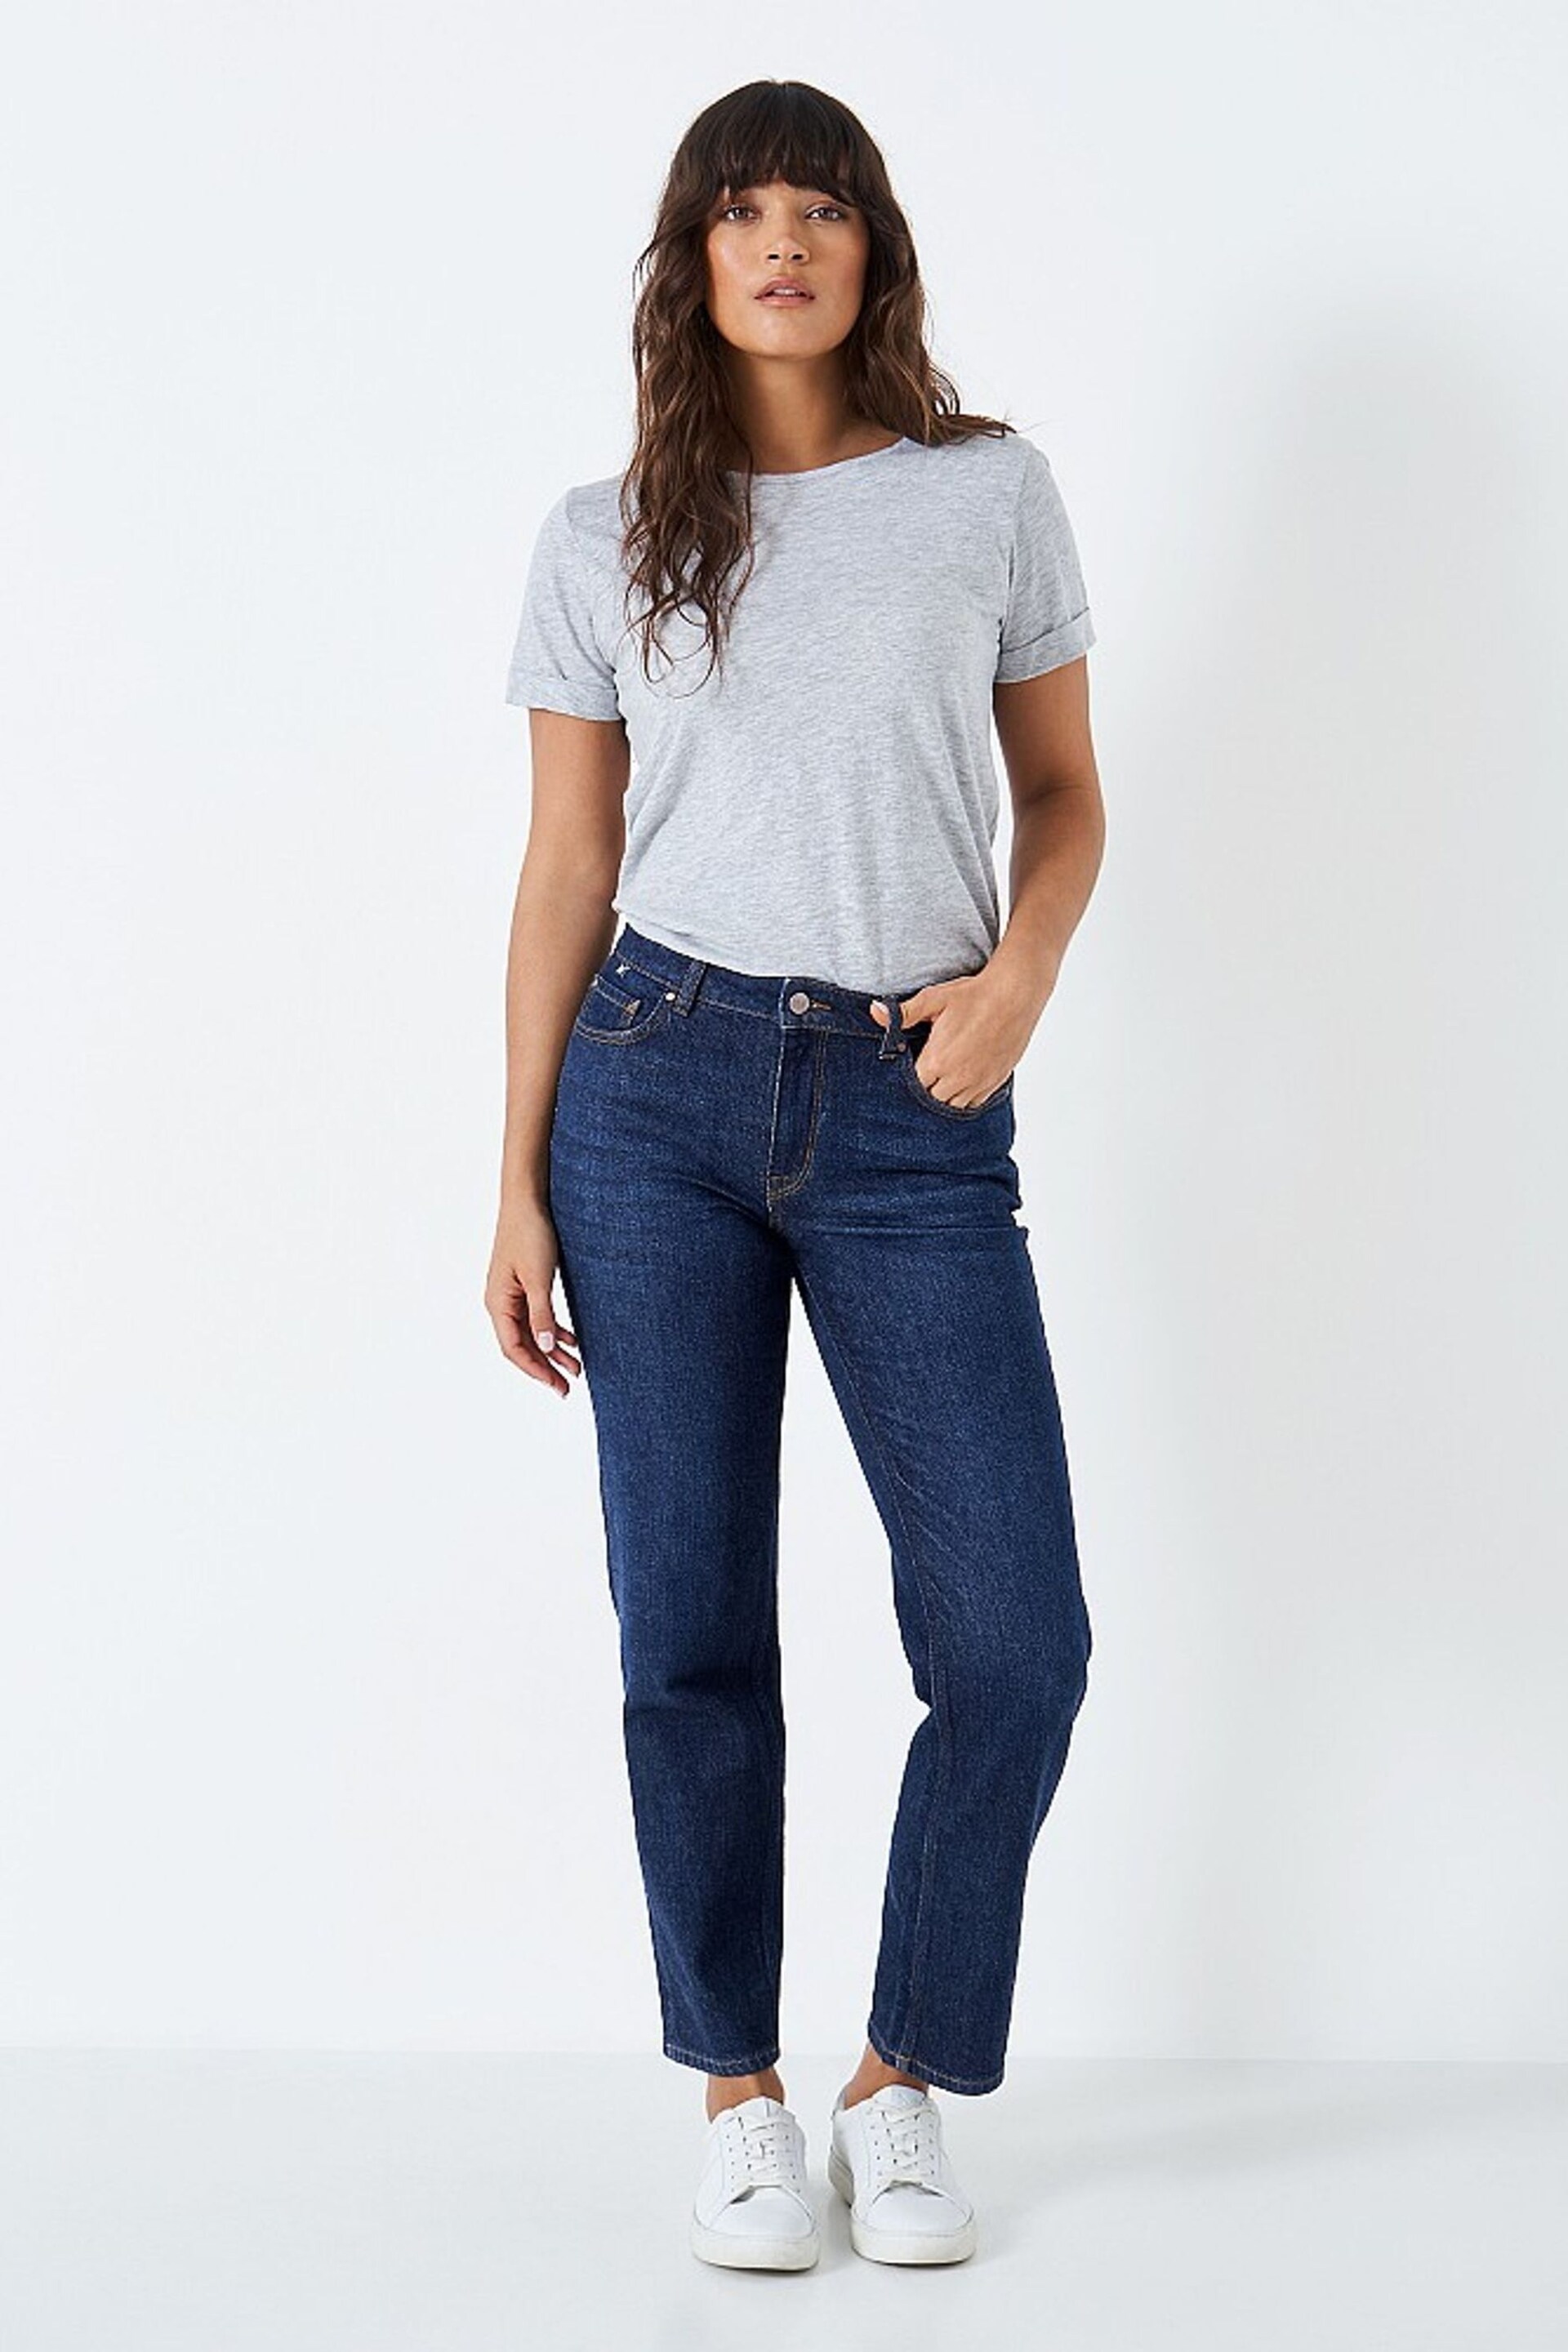 Crew Clothing Girlfriend Jeans - Image 3 of 6